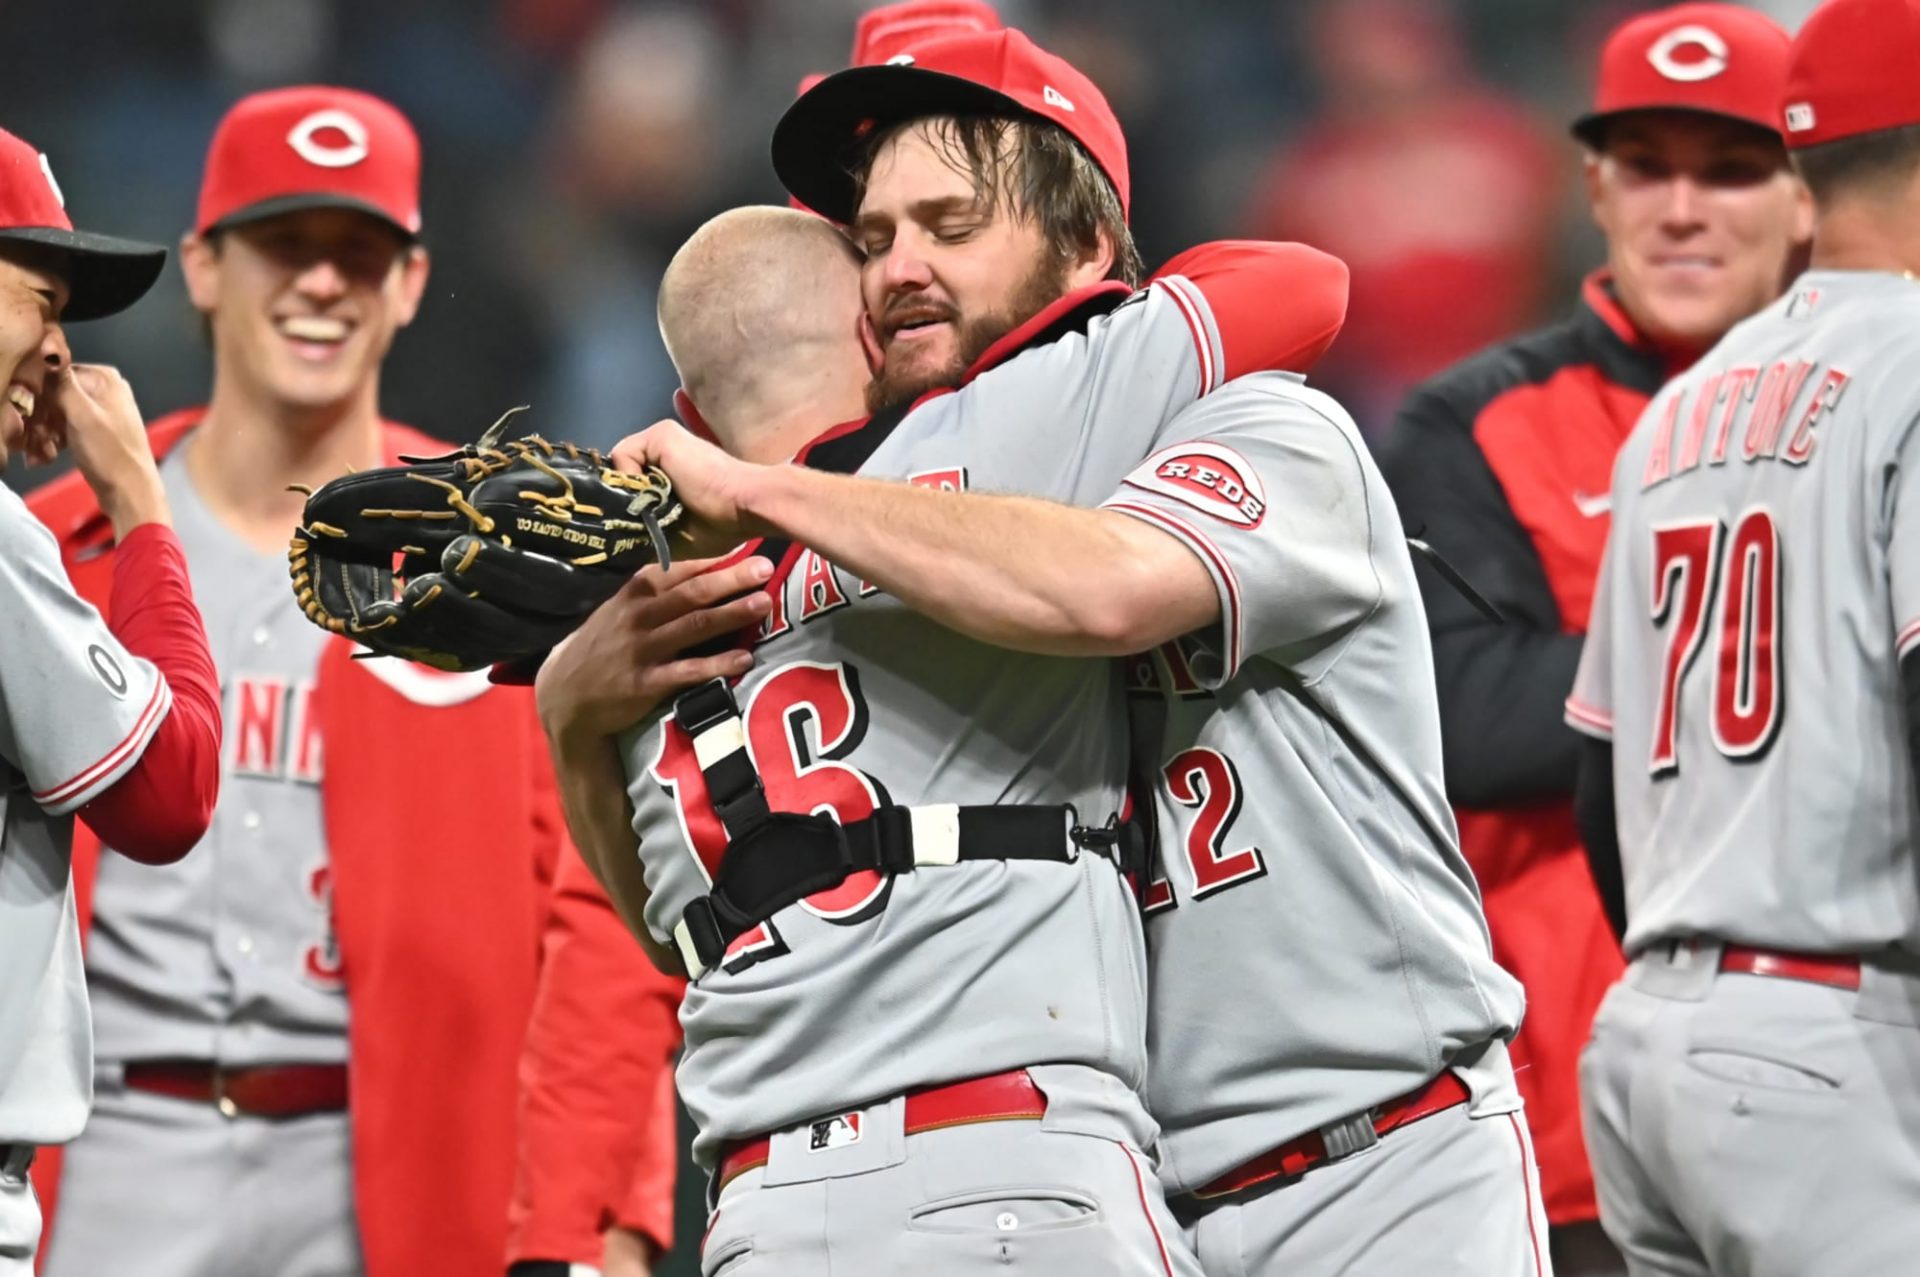 Baseball world reacts to Wade Miley’s no-hitter against Indians